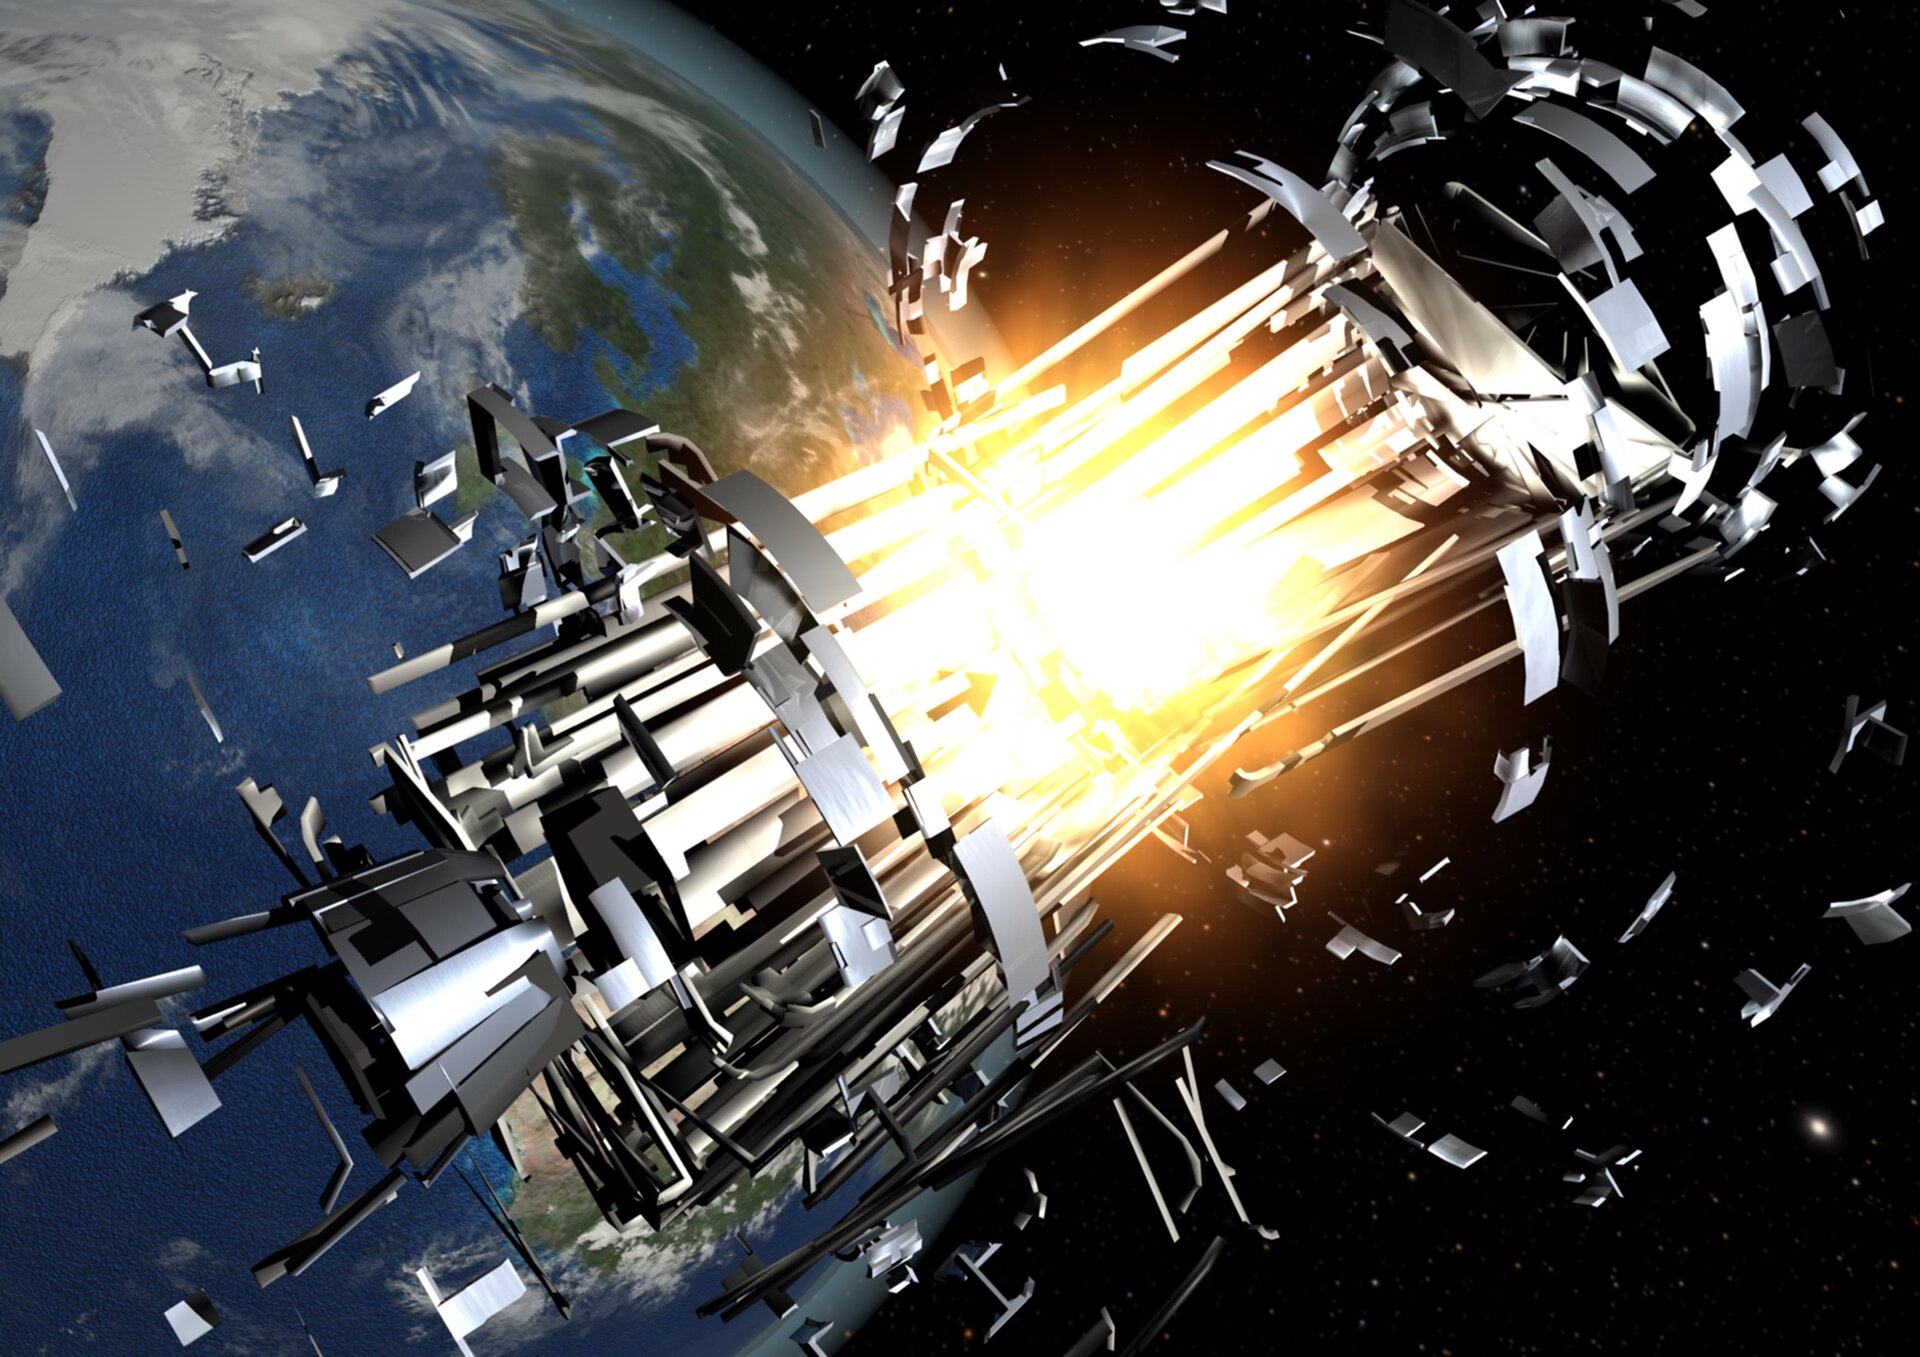 Sources of space debris include explosions of rocket bodies